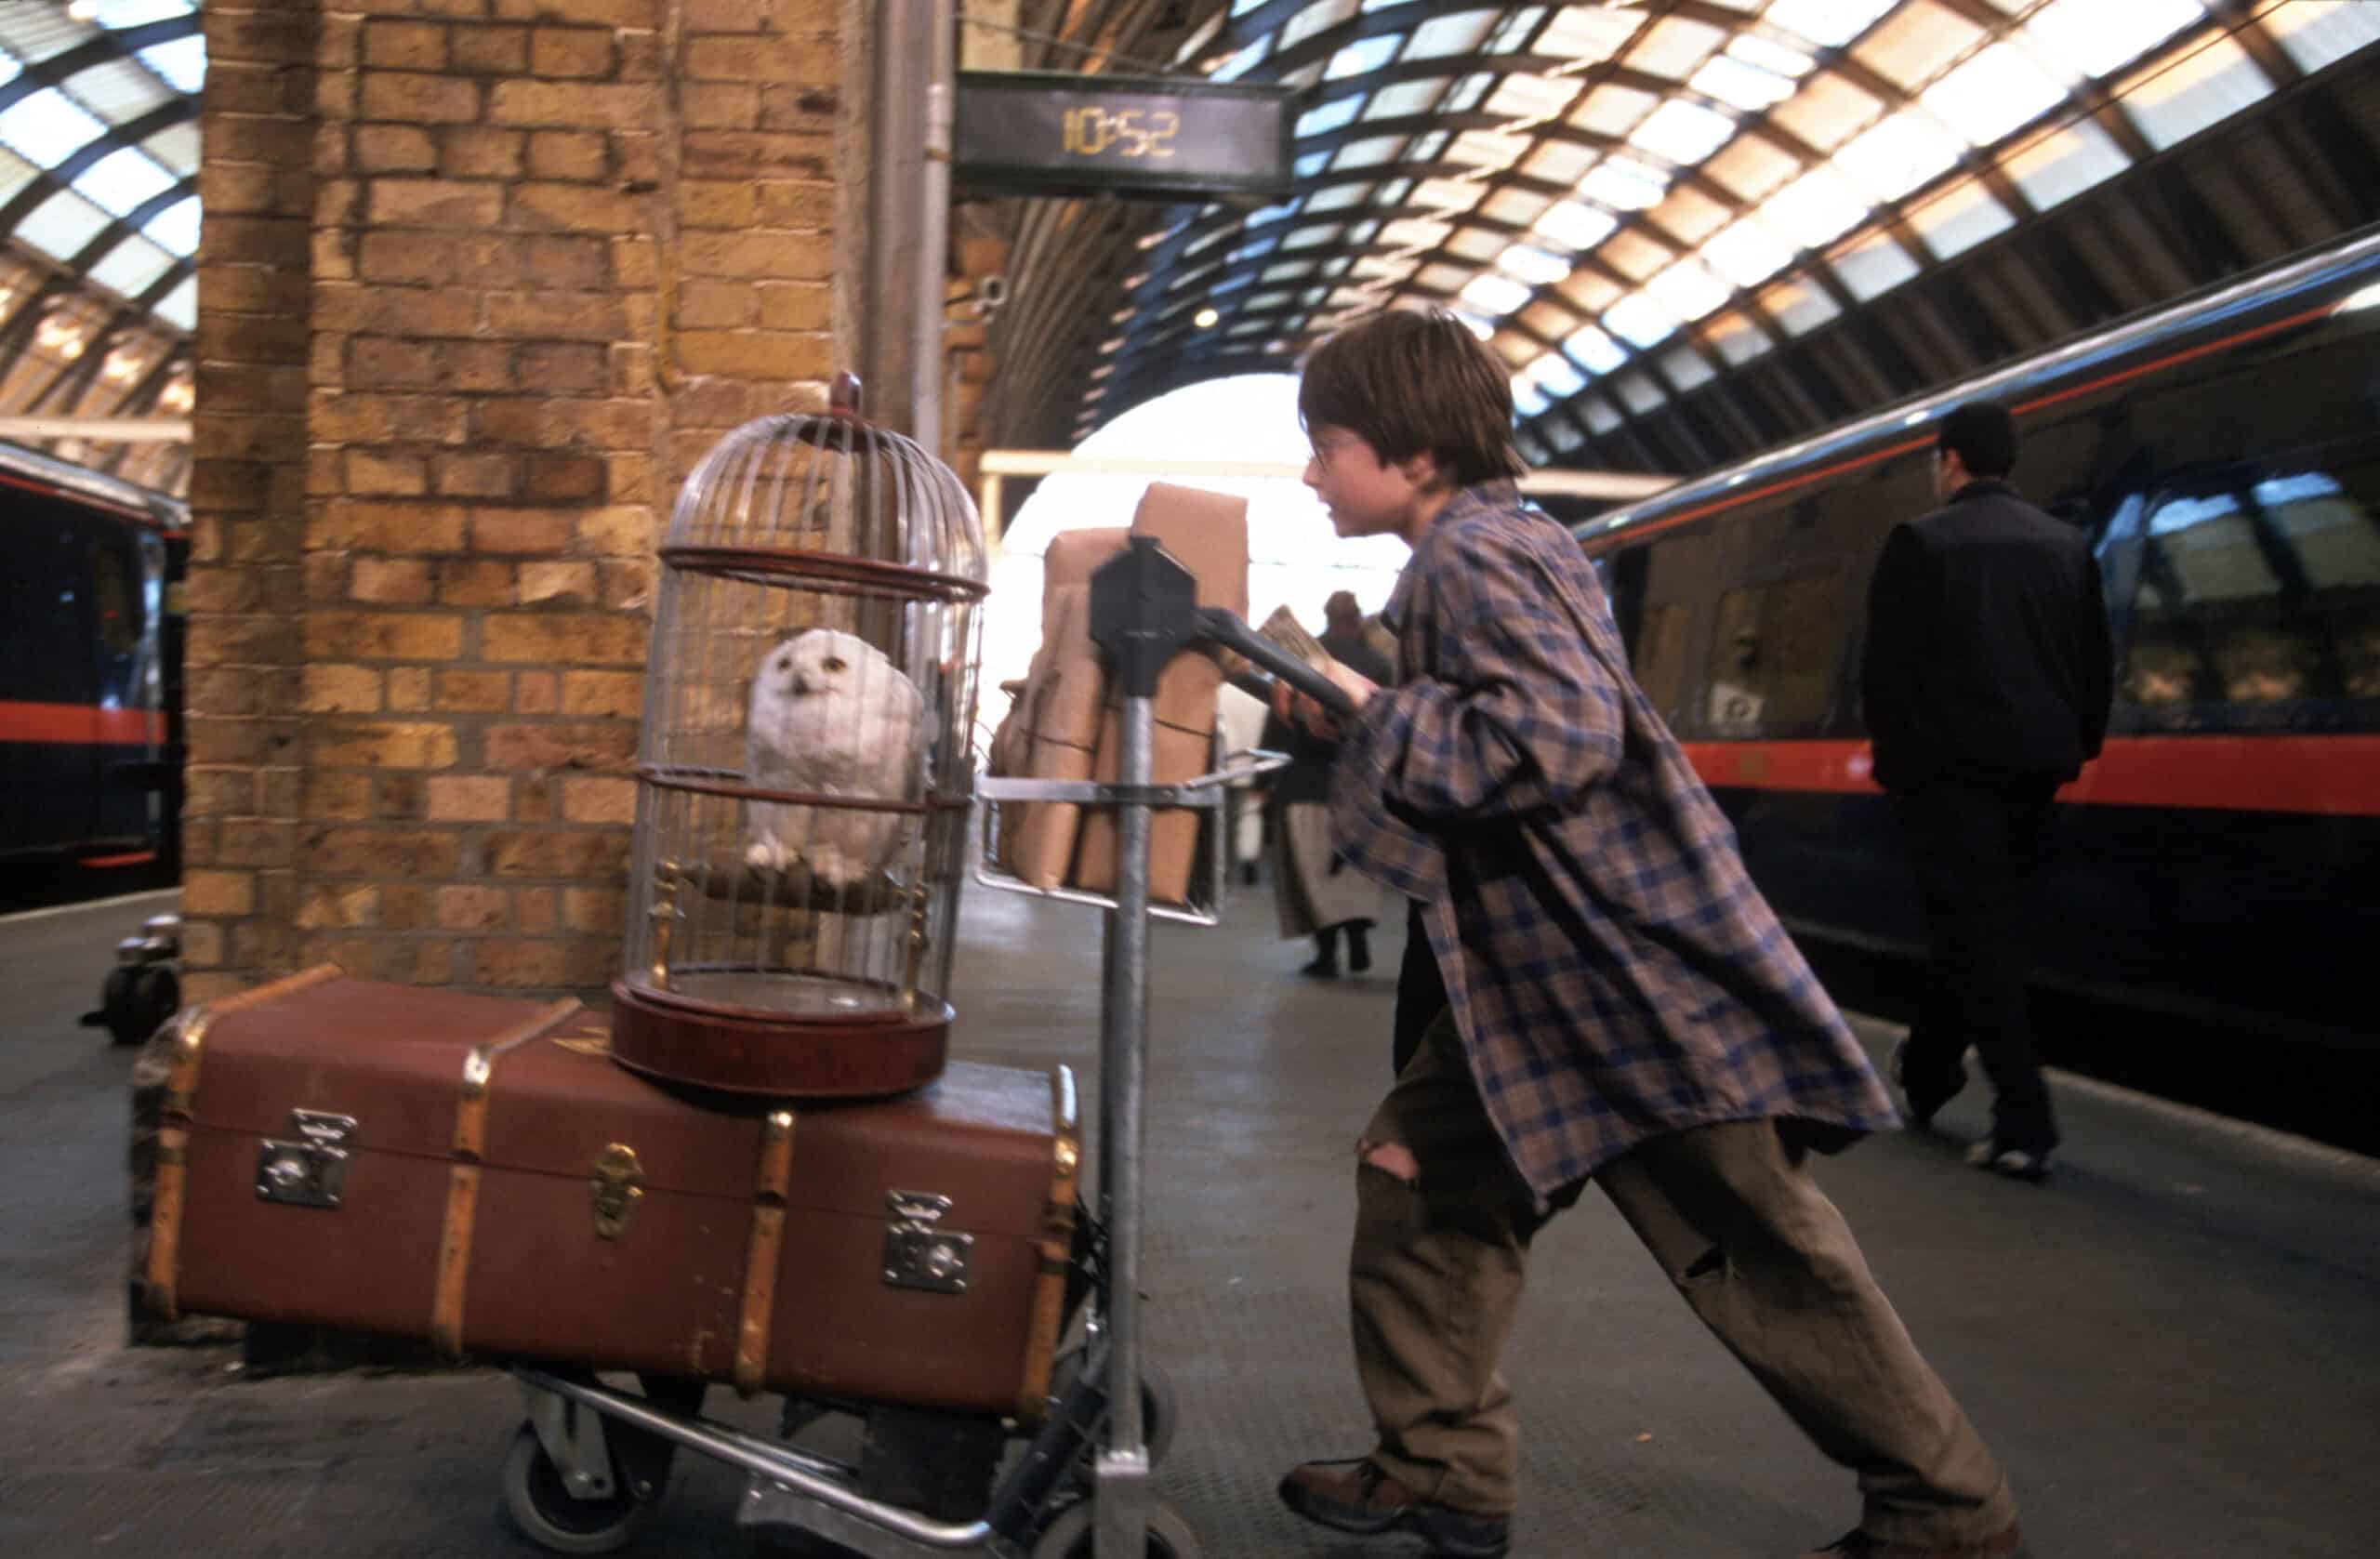 Americans thought things in Harry Potter belonged to the wizarding world but they were actually just British